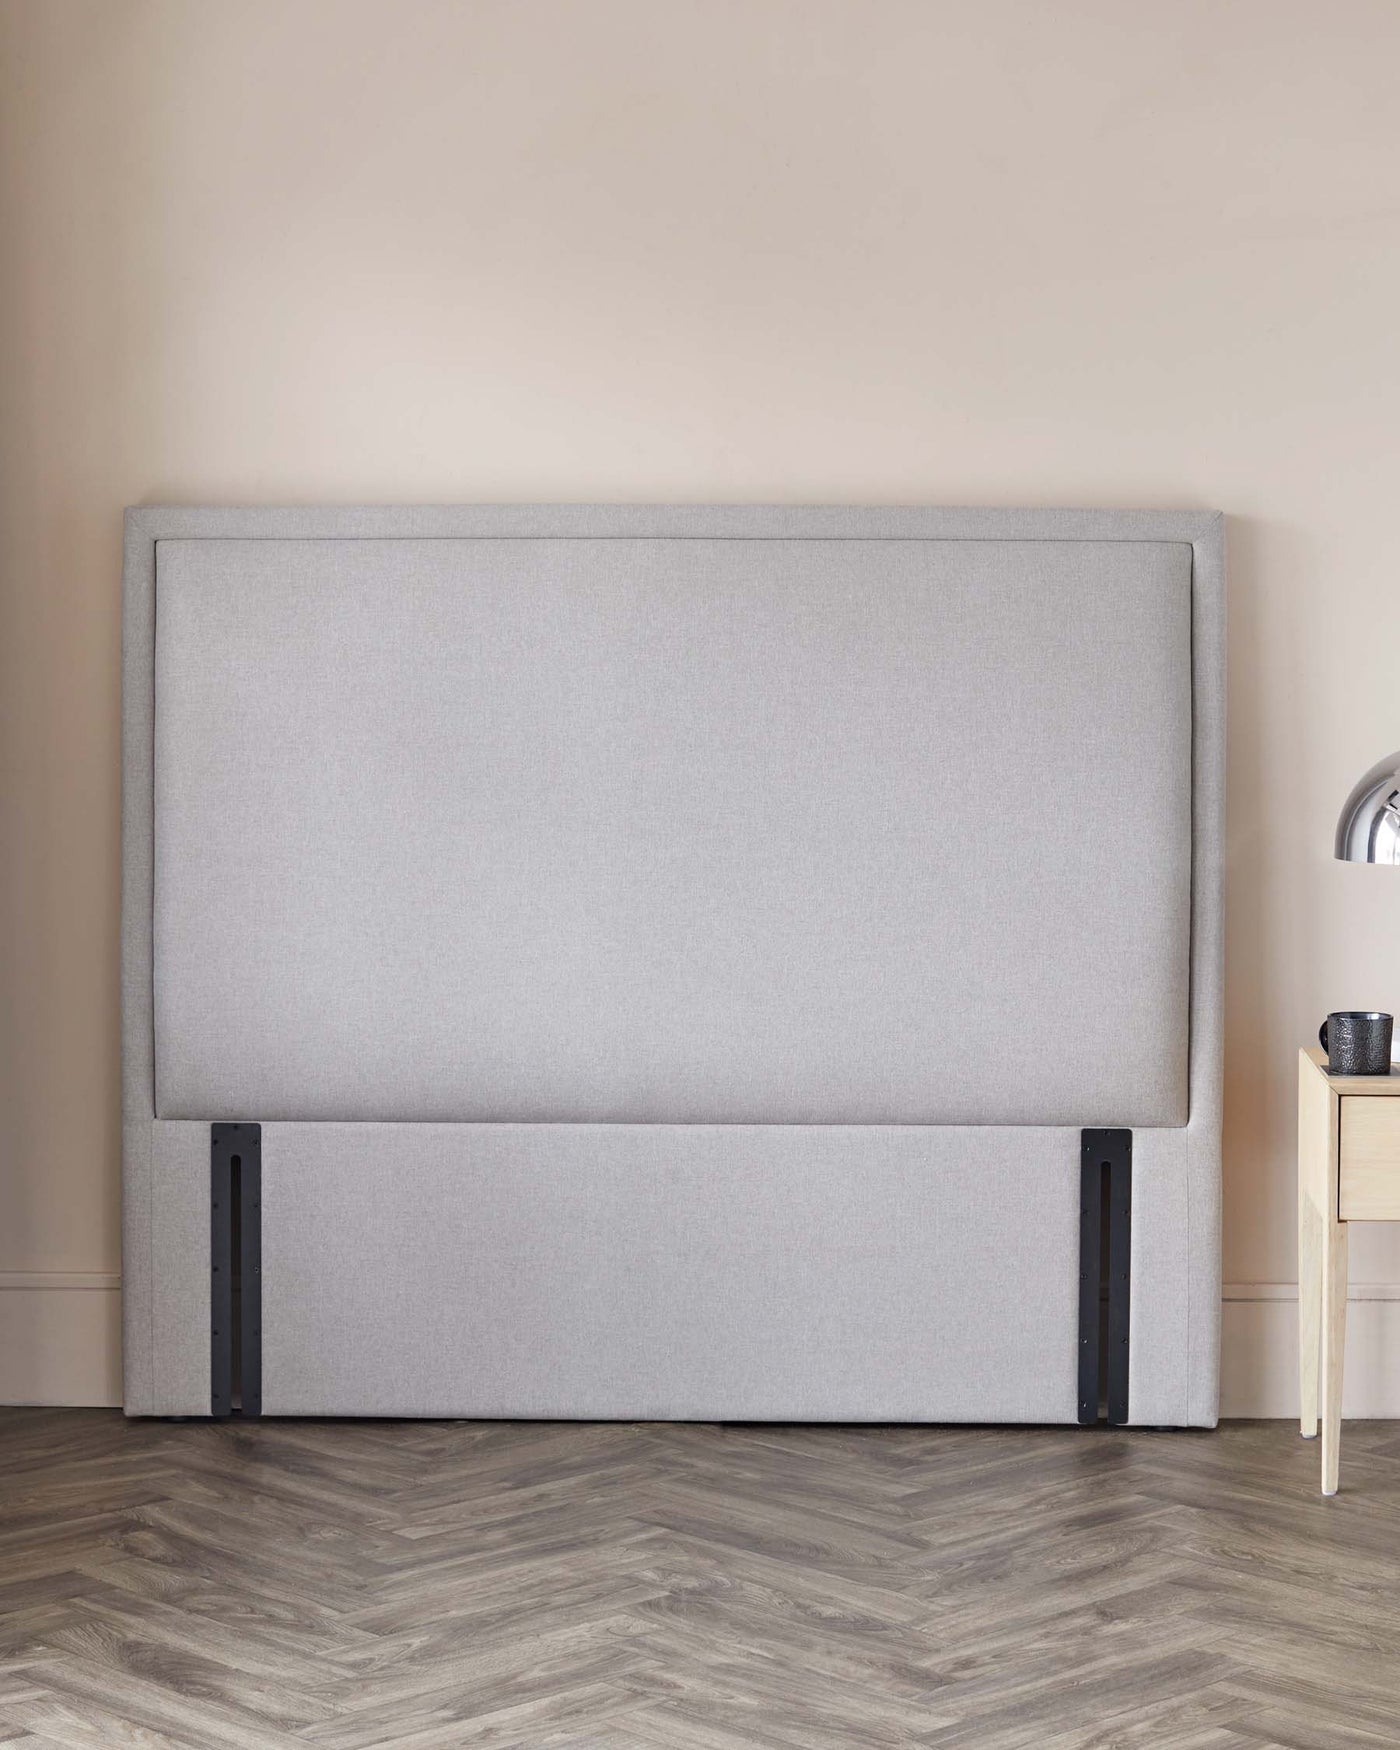 Contemporary grey upholstered headboard with a minimalist design and black metal legs, accompanied by a light wooden bedside table with a black vase.